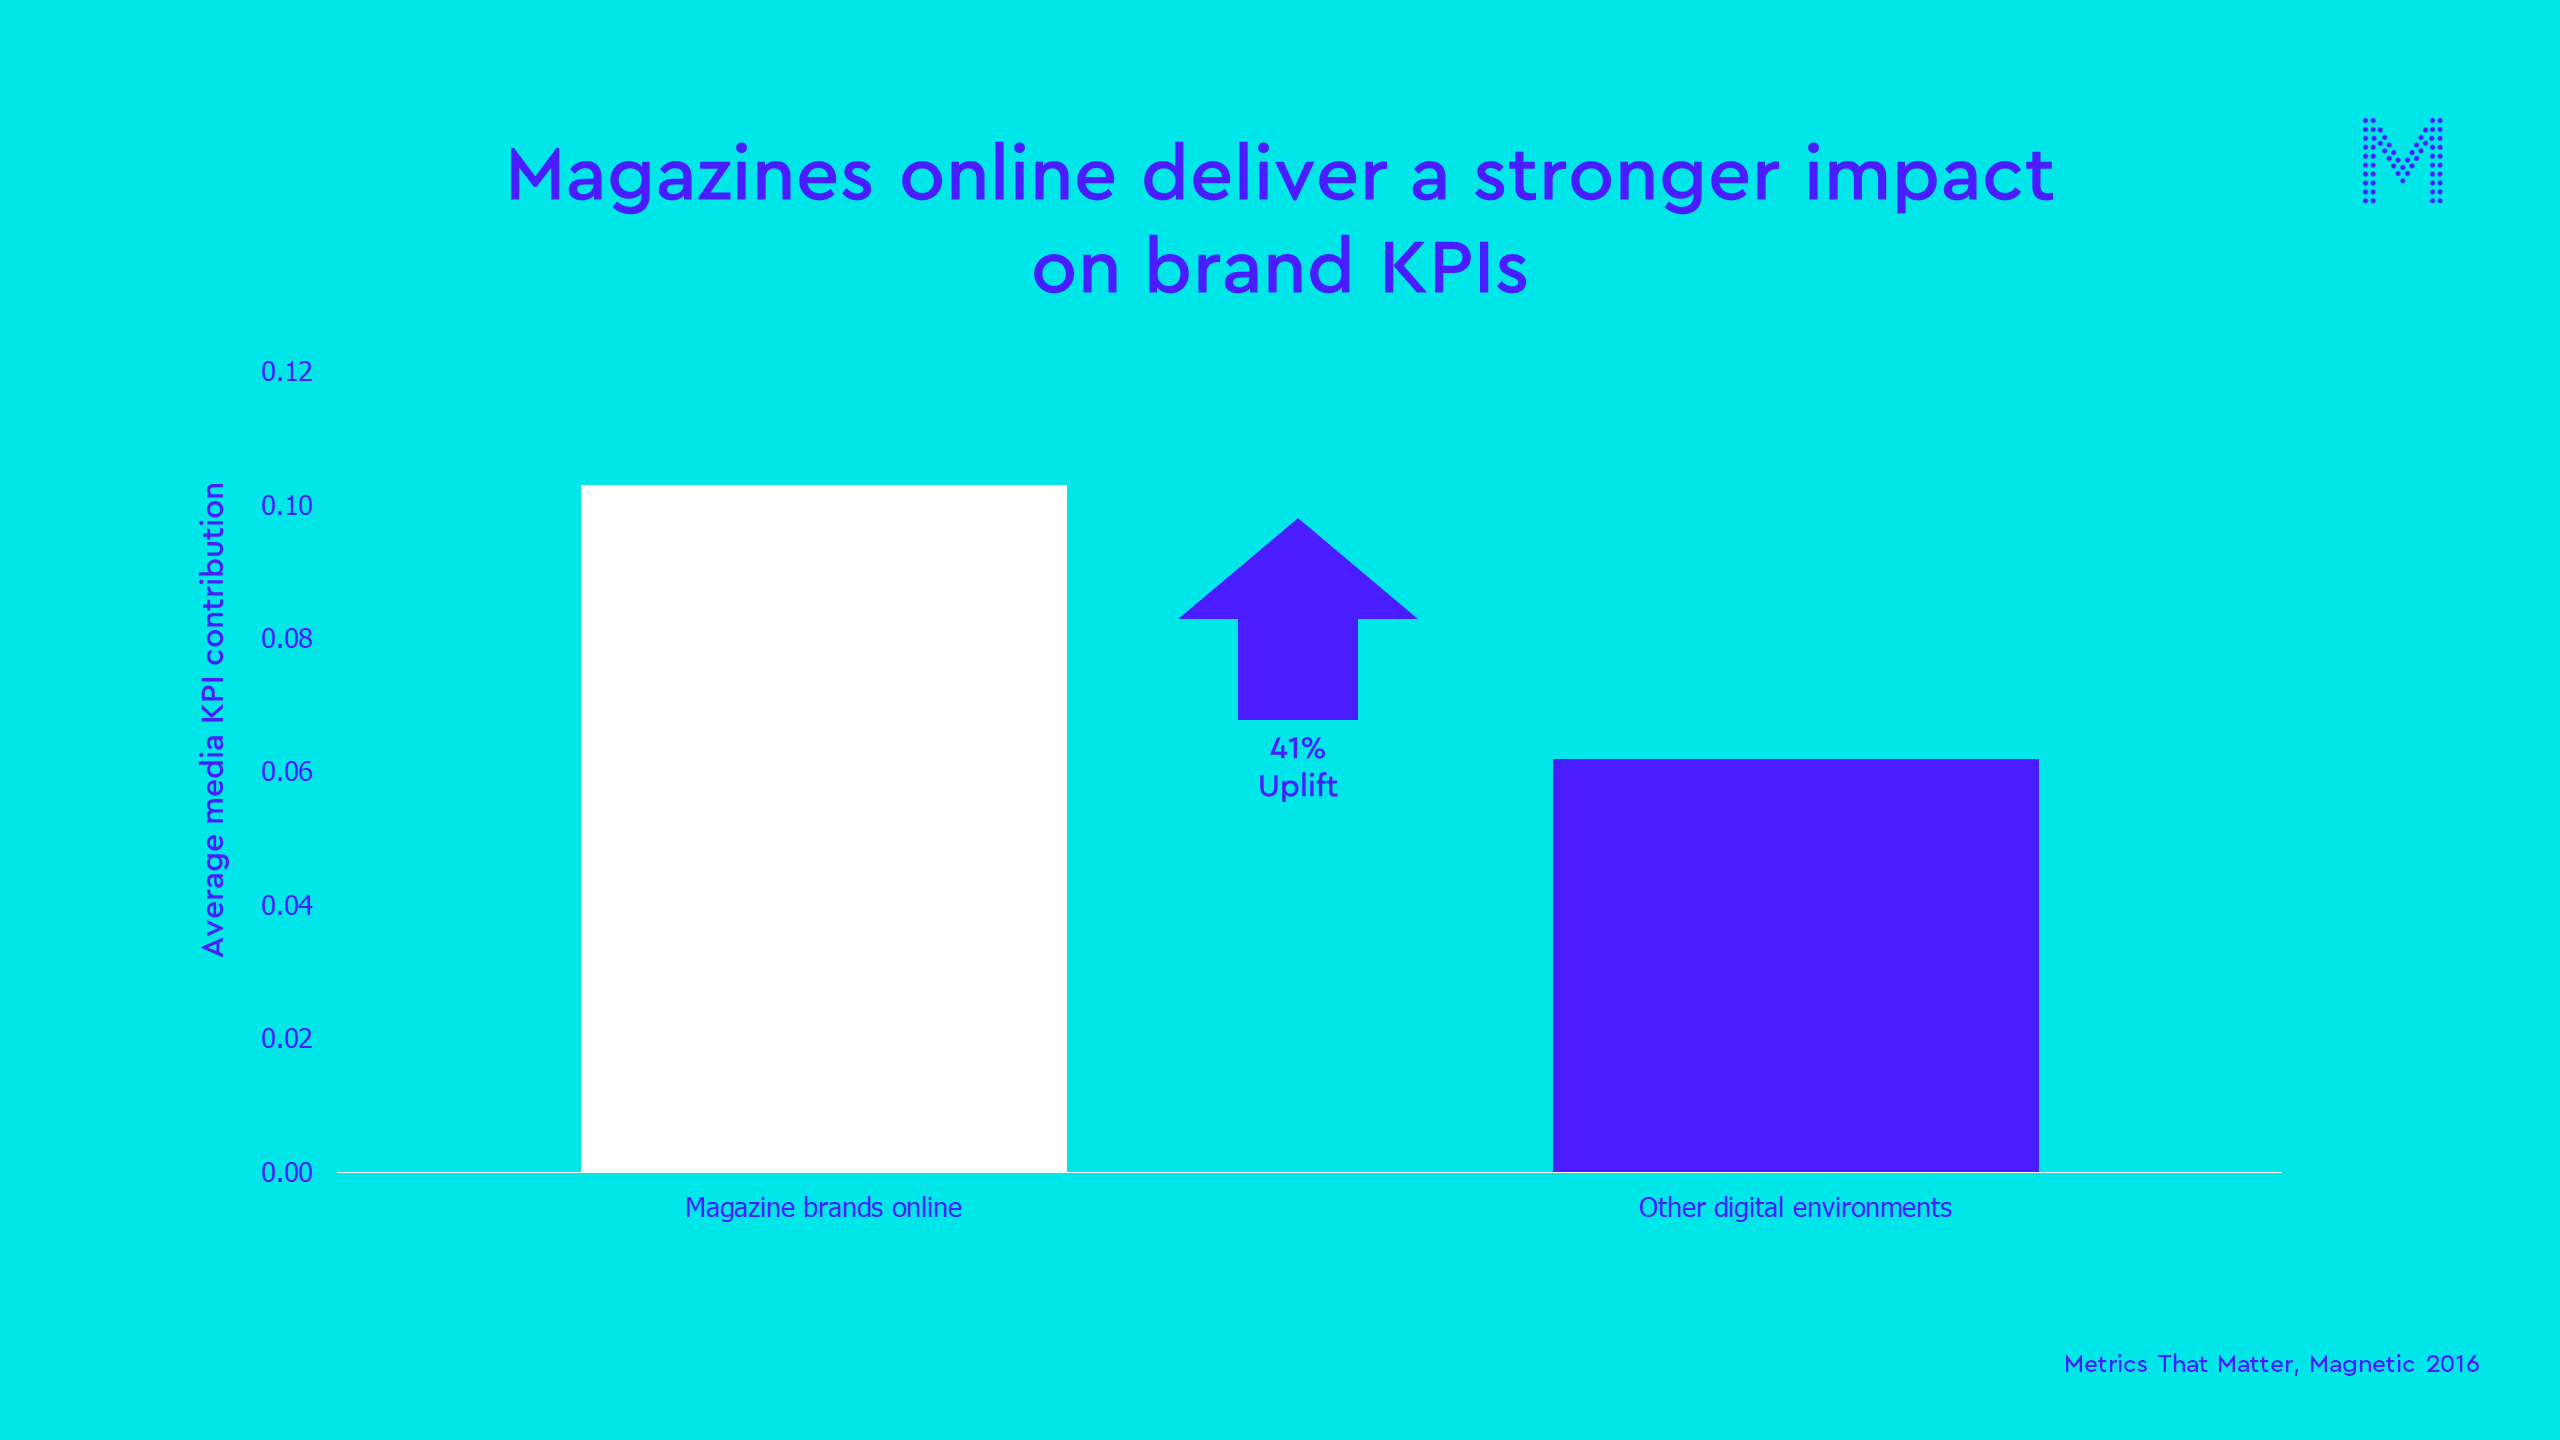 Magazines online deliver a stronger impact